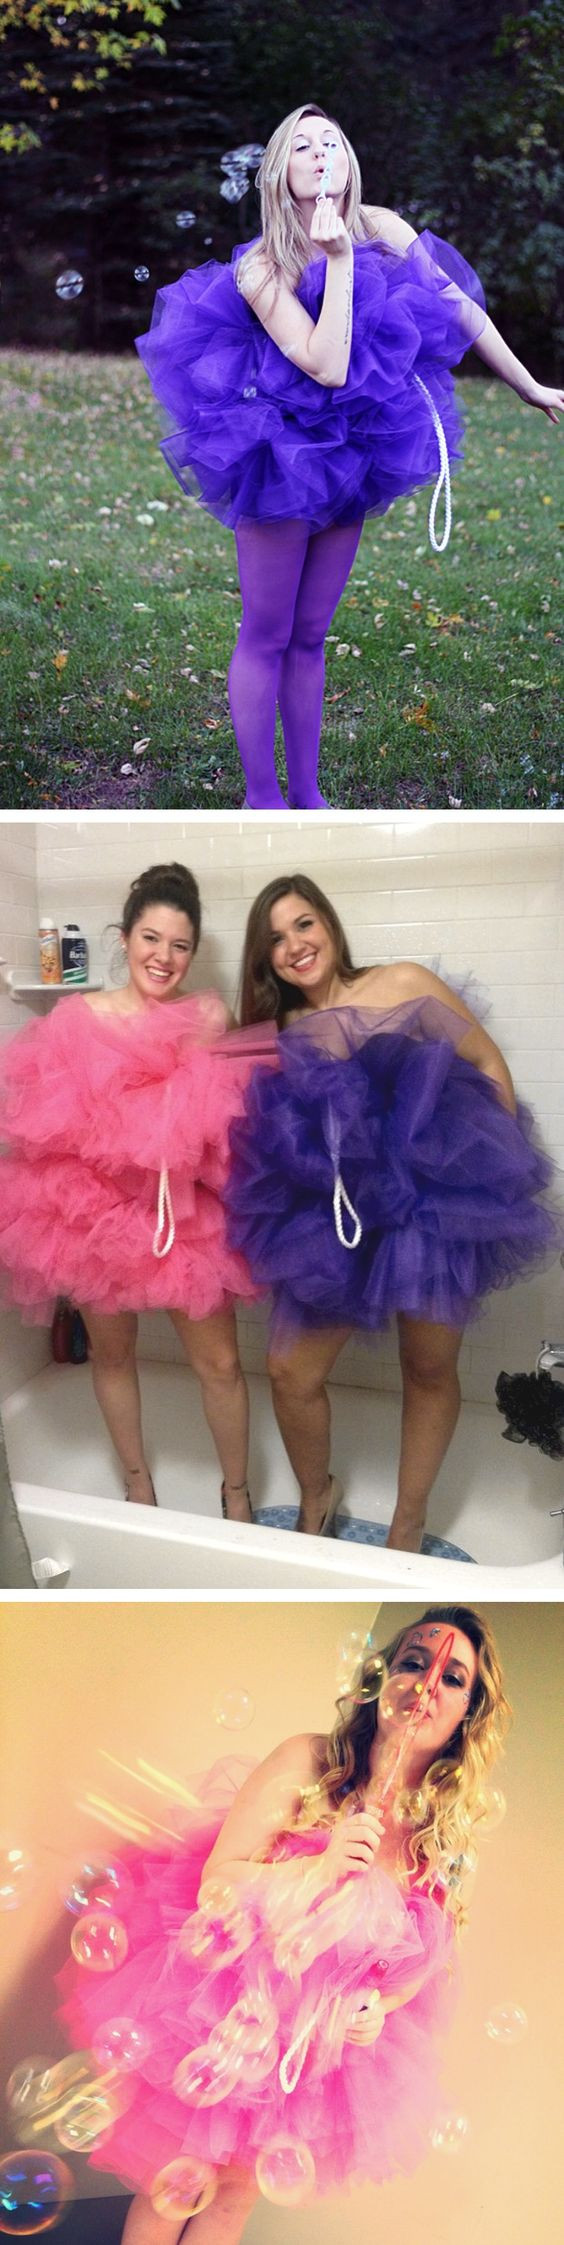 DIY Loofah Costume
 DIY Shower Loofah Pouf Costumes Blow bubbles for the